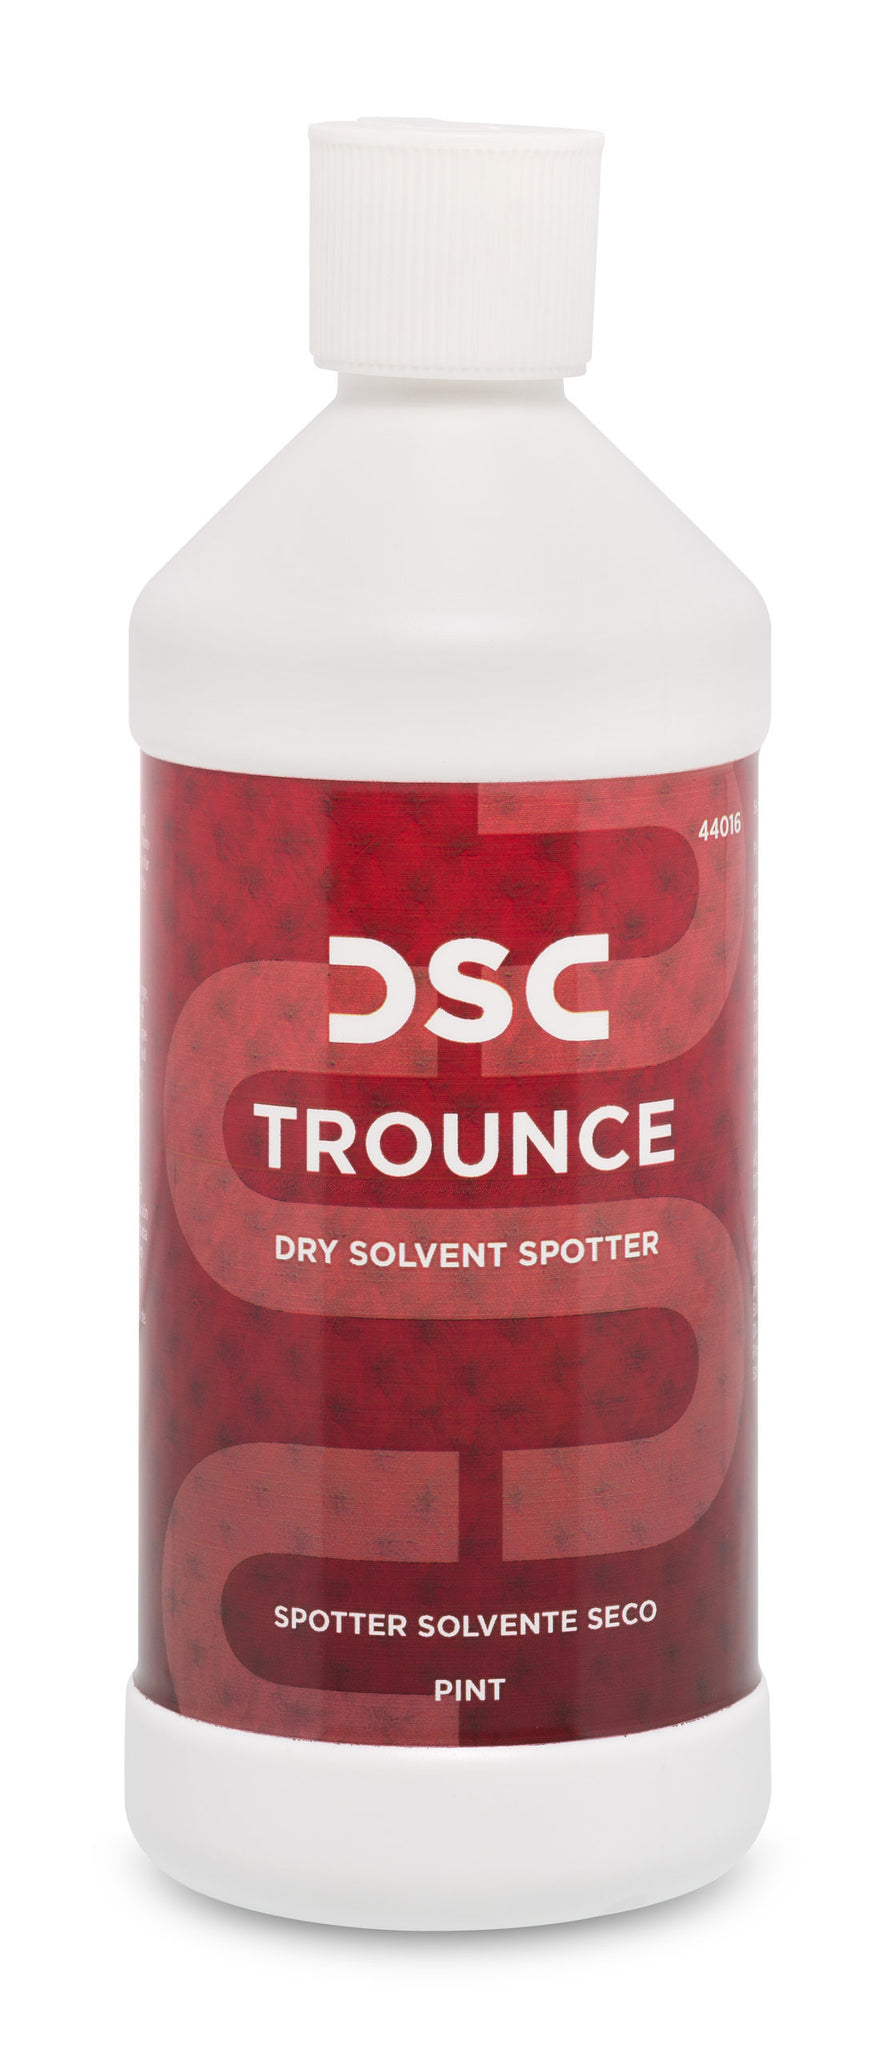 PRESPRAYS AND SPOTTERS/ "Trounce" Dry Spotter, Pint